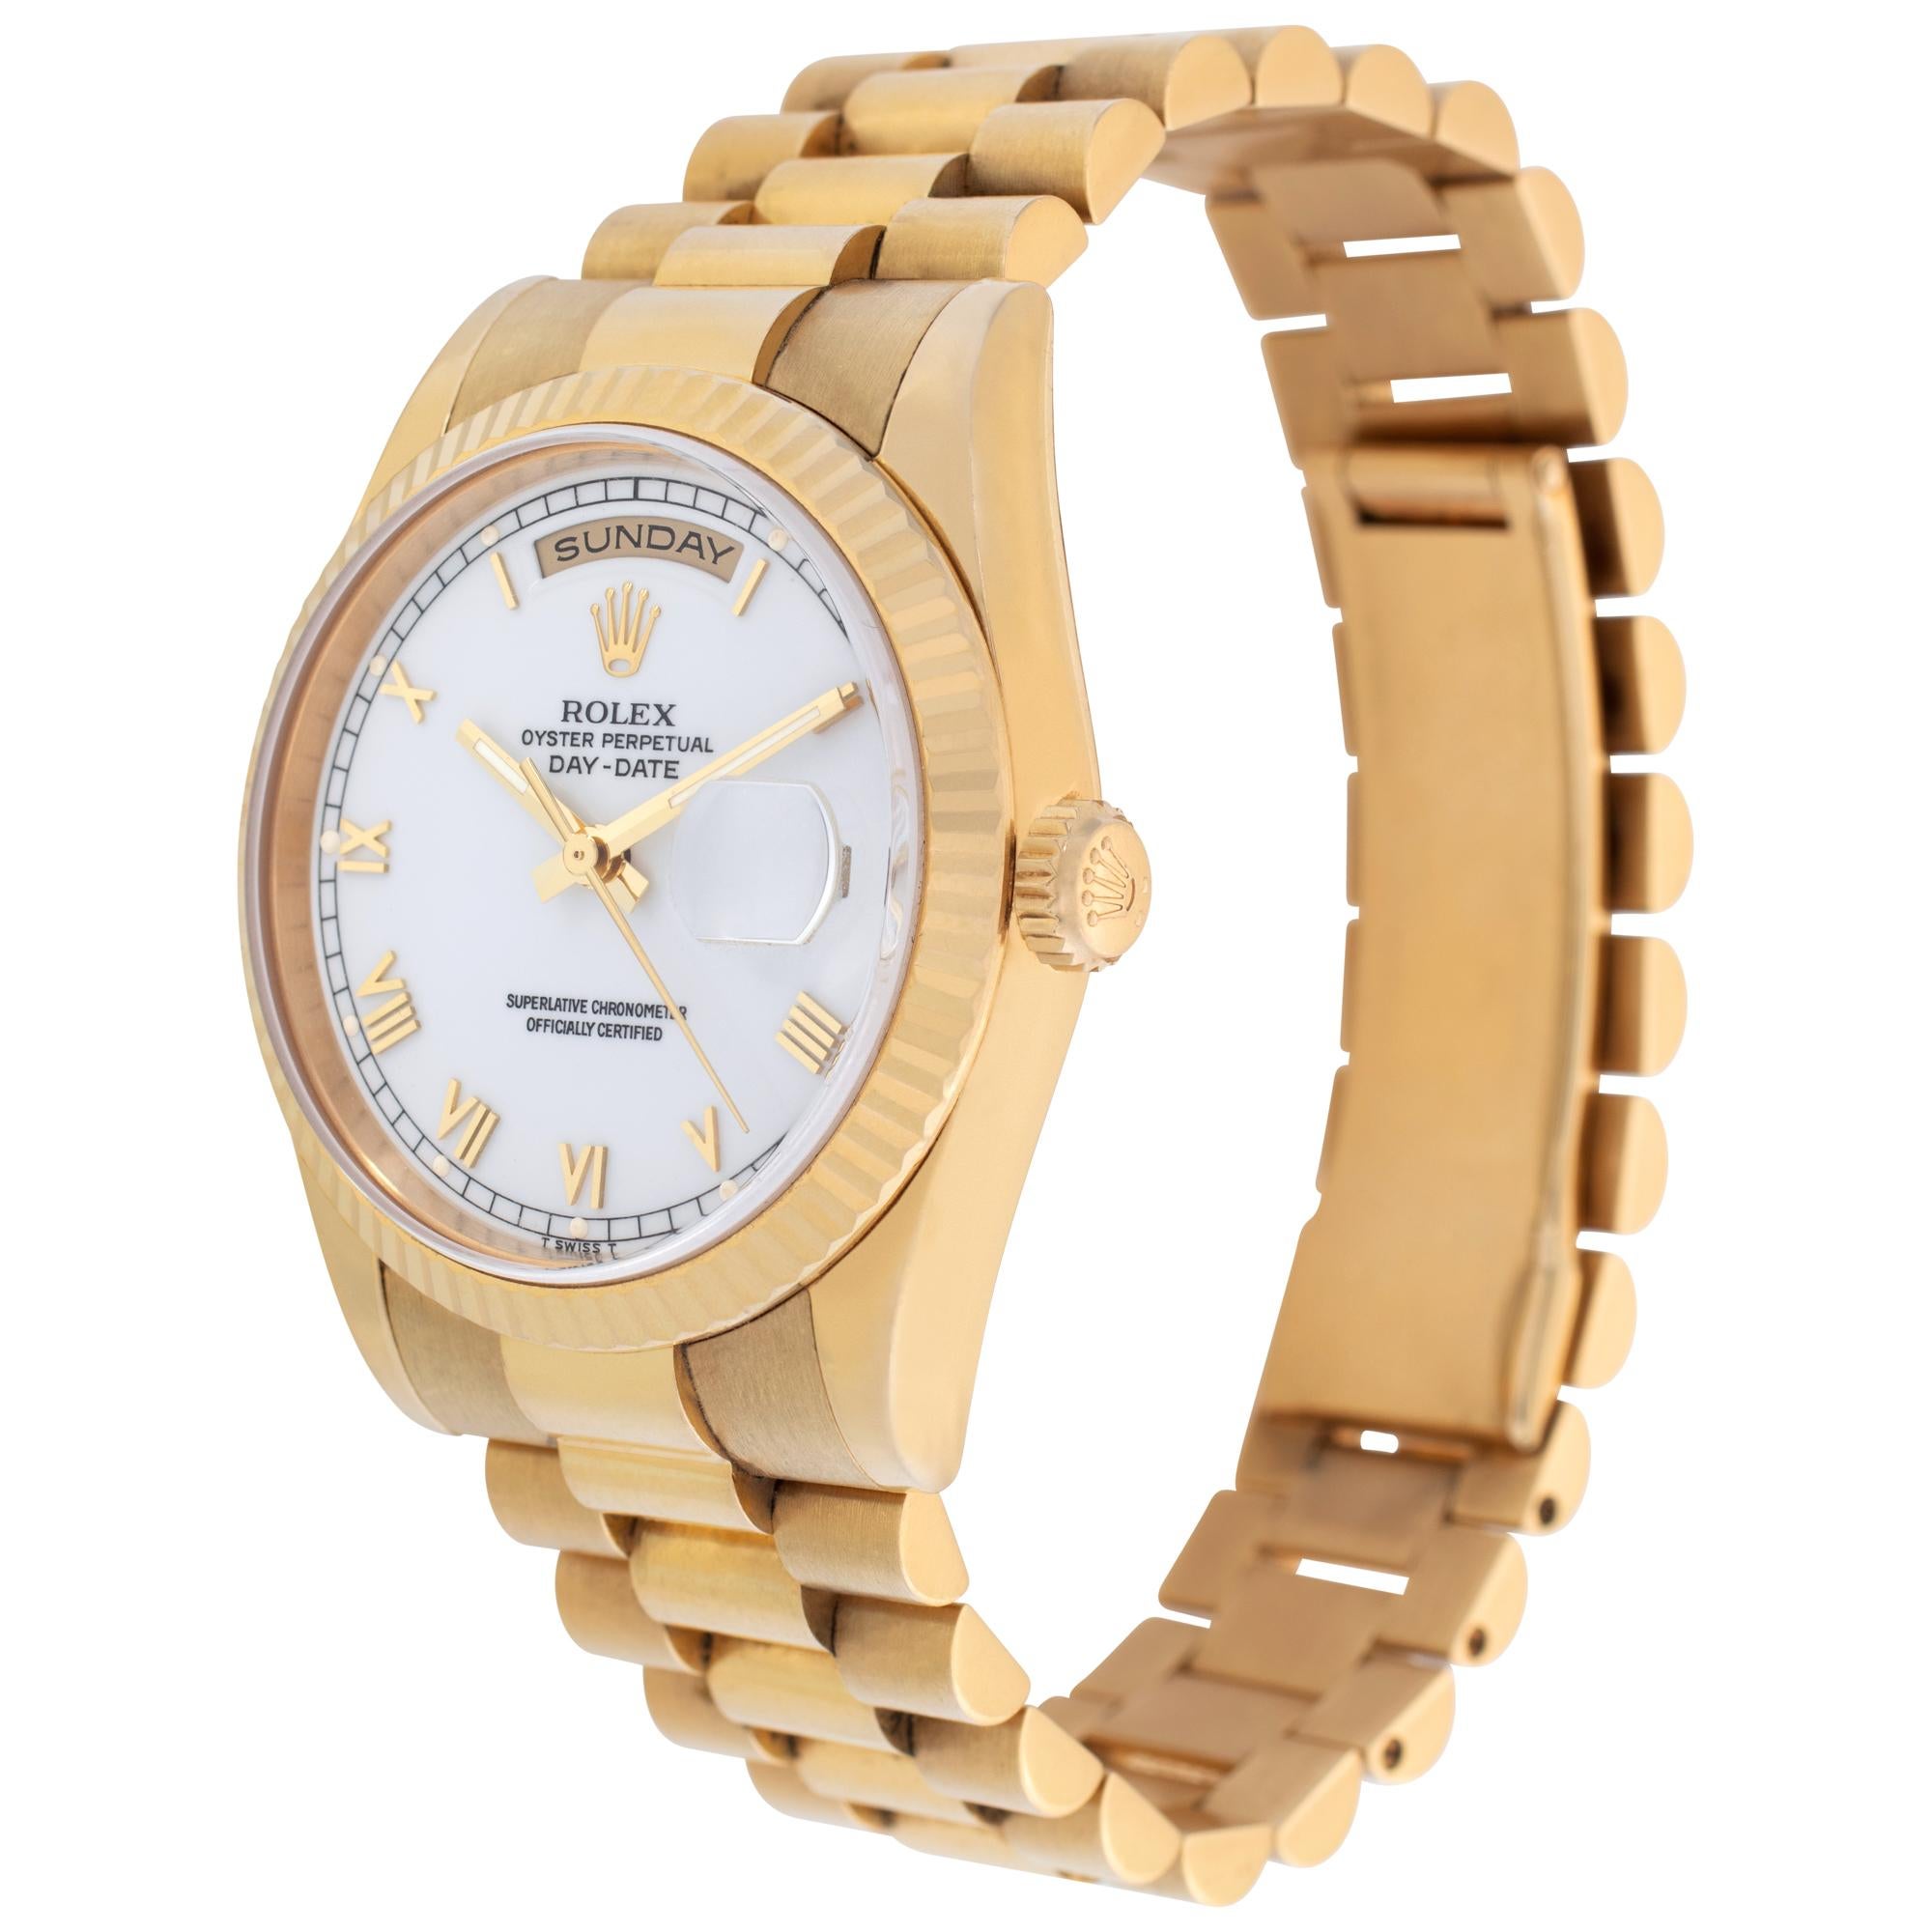 Rolex Day-Date in 18k with white dial set with yellow gold applied Roman numeral hour markers. Auto w/ sweep seconds, date and day. 36 mm case size. With box and papers. Ref 118238. Circa 2006. **Bank wire only at this price** Fine Pre-owned Rolex